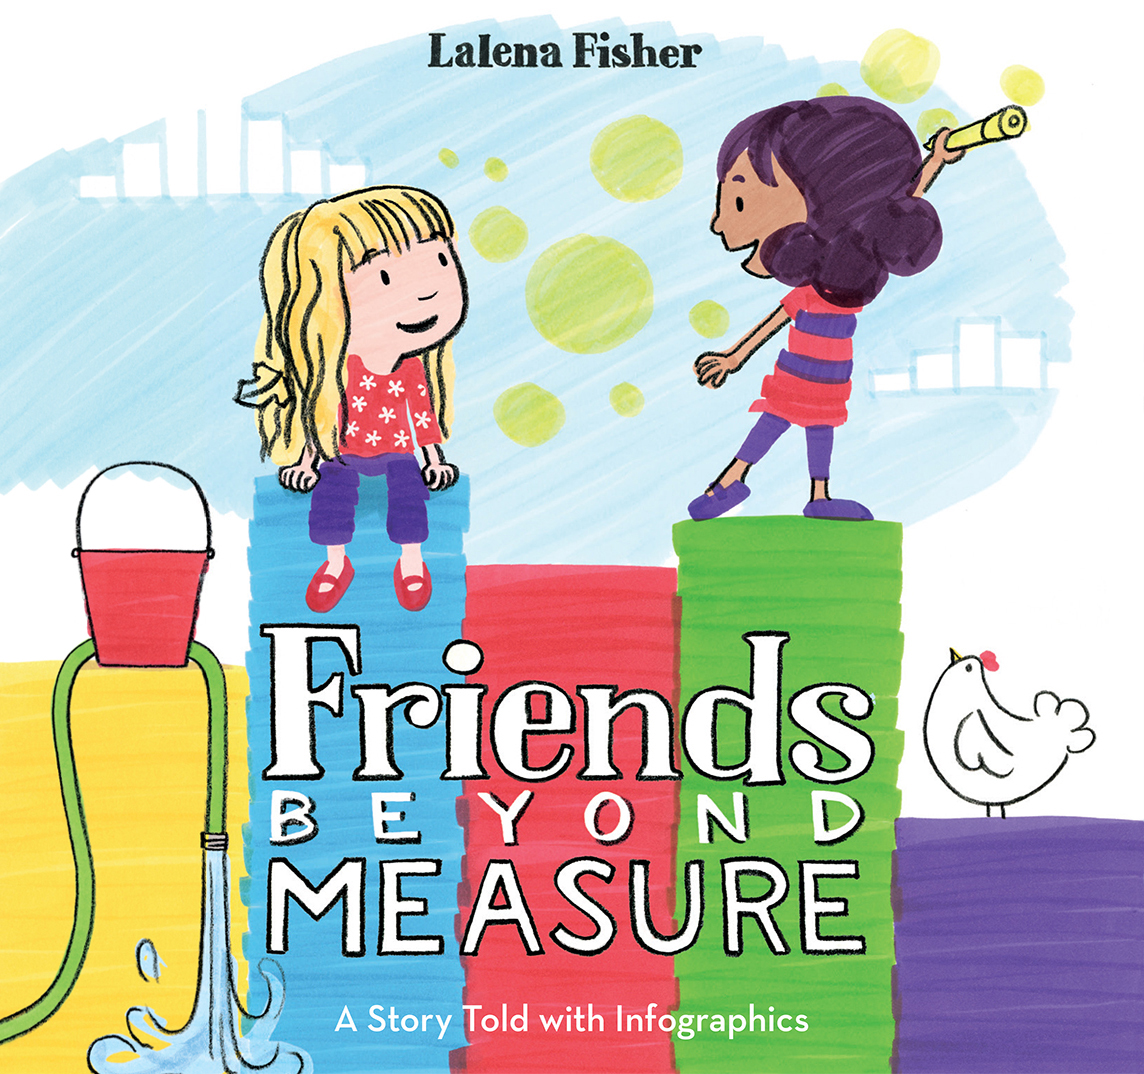 Cover of the Book "Friends Beyond Measure" featuring an illustration of two children sitting on a stack of multi-colored bars. One of the children is drawing dots on the wall behind them.